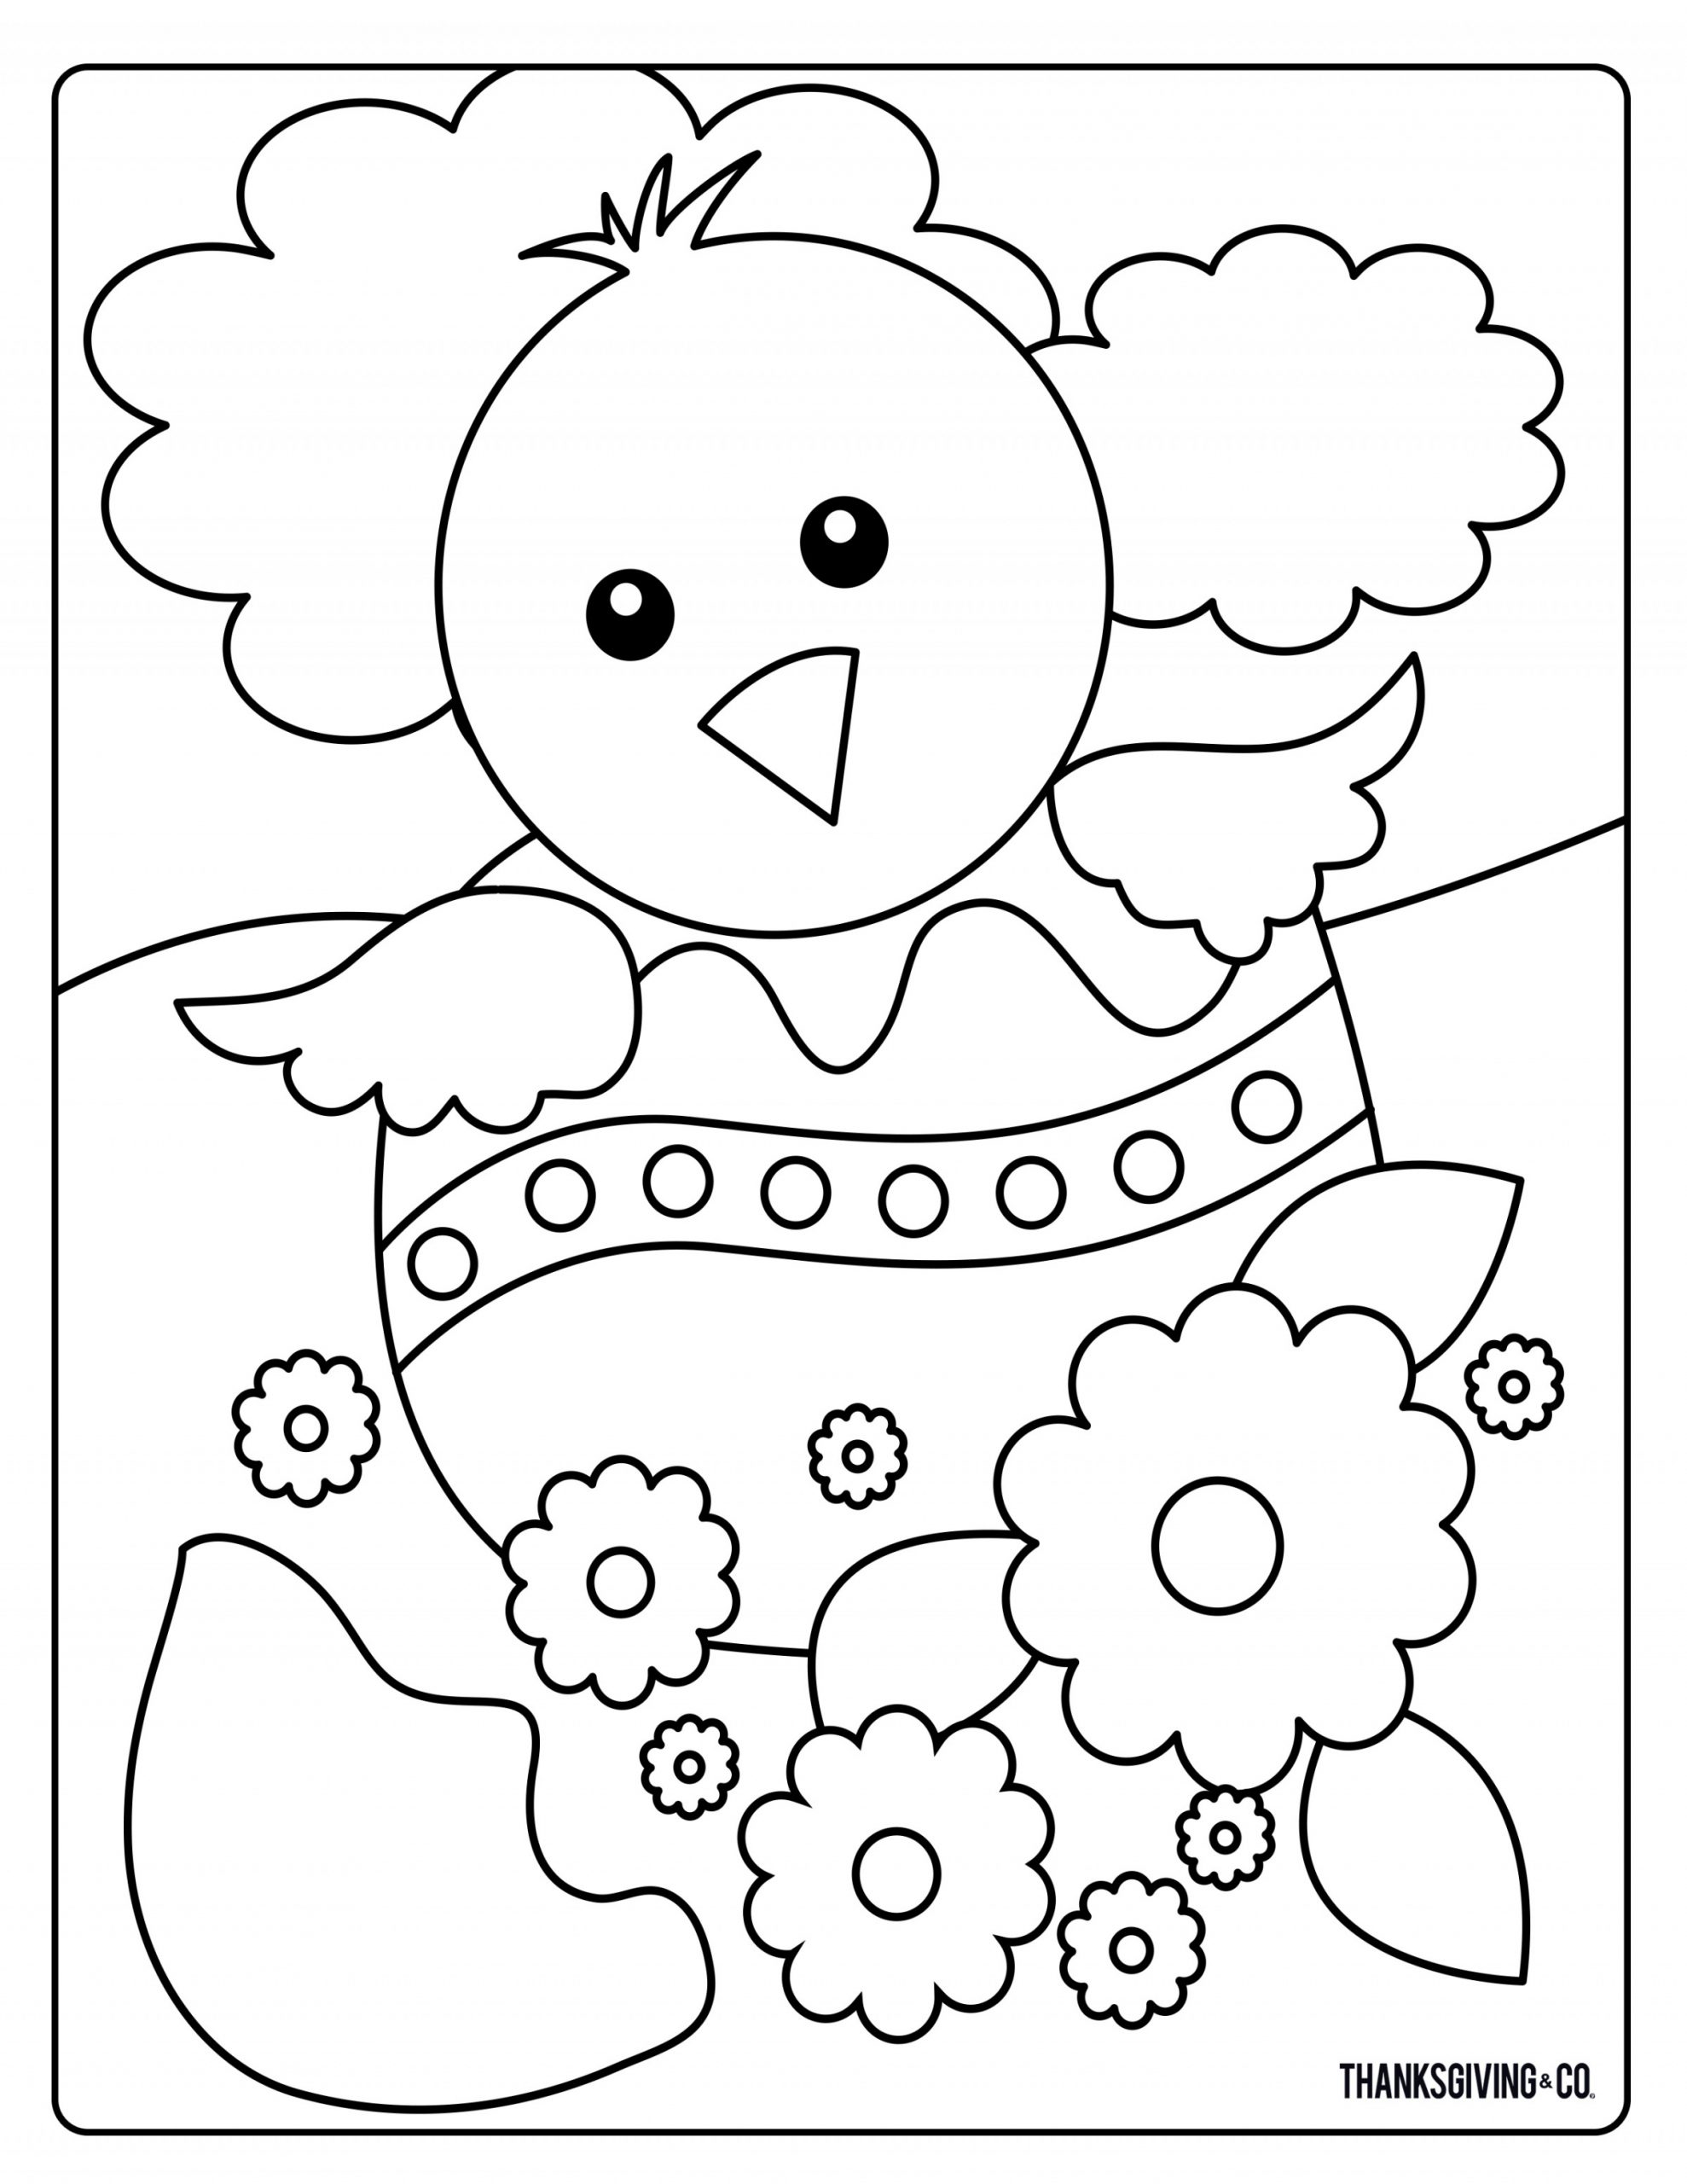 worksheet ~ Printable Activities For Kids Coloring Pages Easters Stunning  Bathroom Freean Easter Printables Toddlers Activity Sheets Free 52  Extraordinary Printable Activities For Kids. Free Easter Printable  Activities For Kids. Free Printable